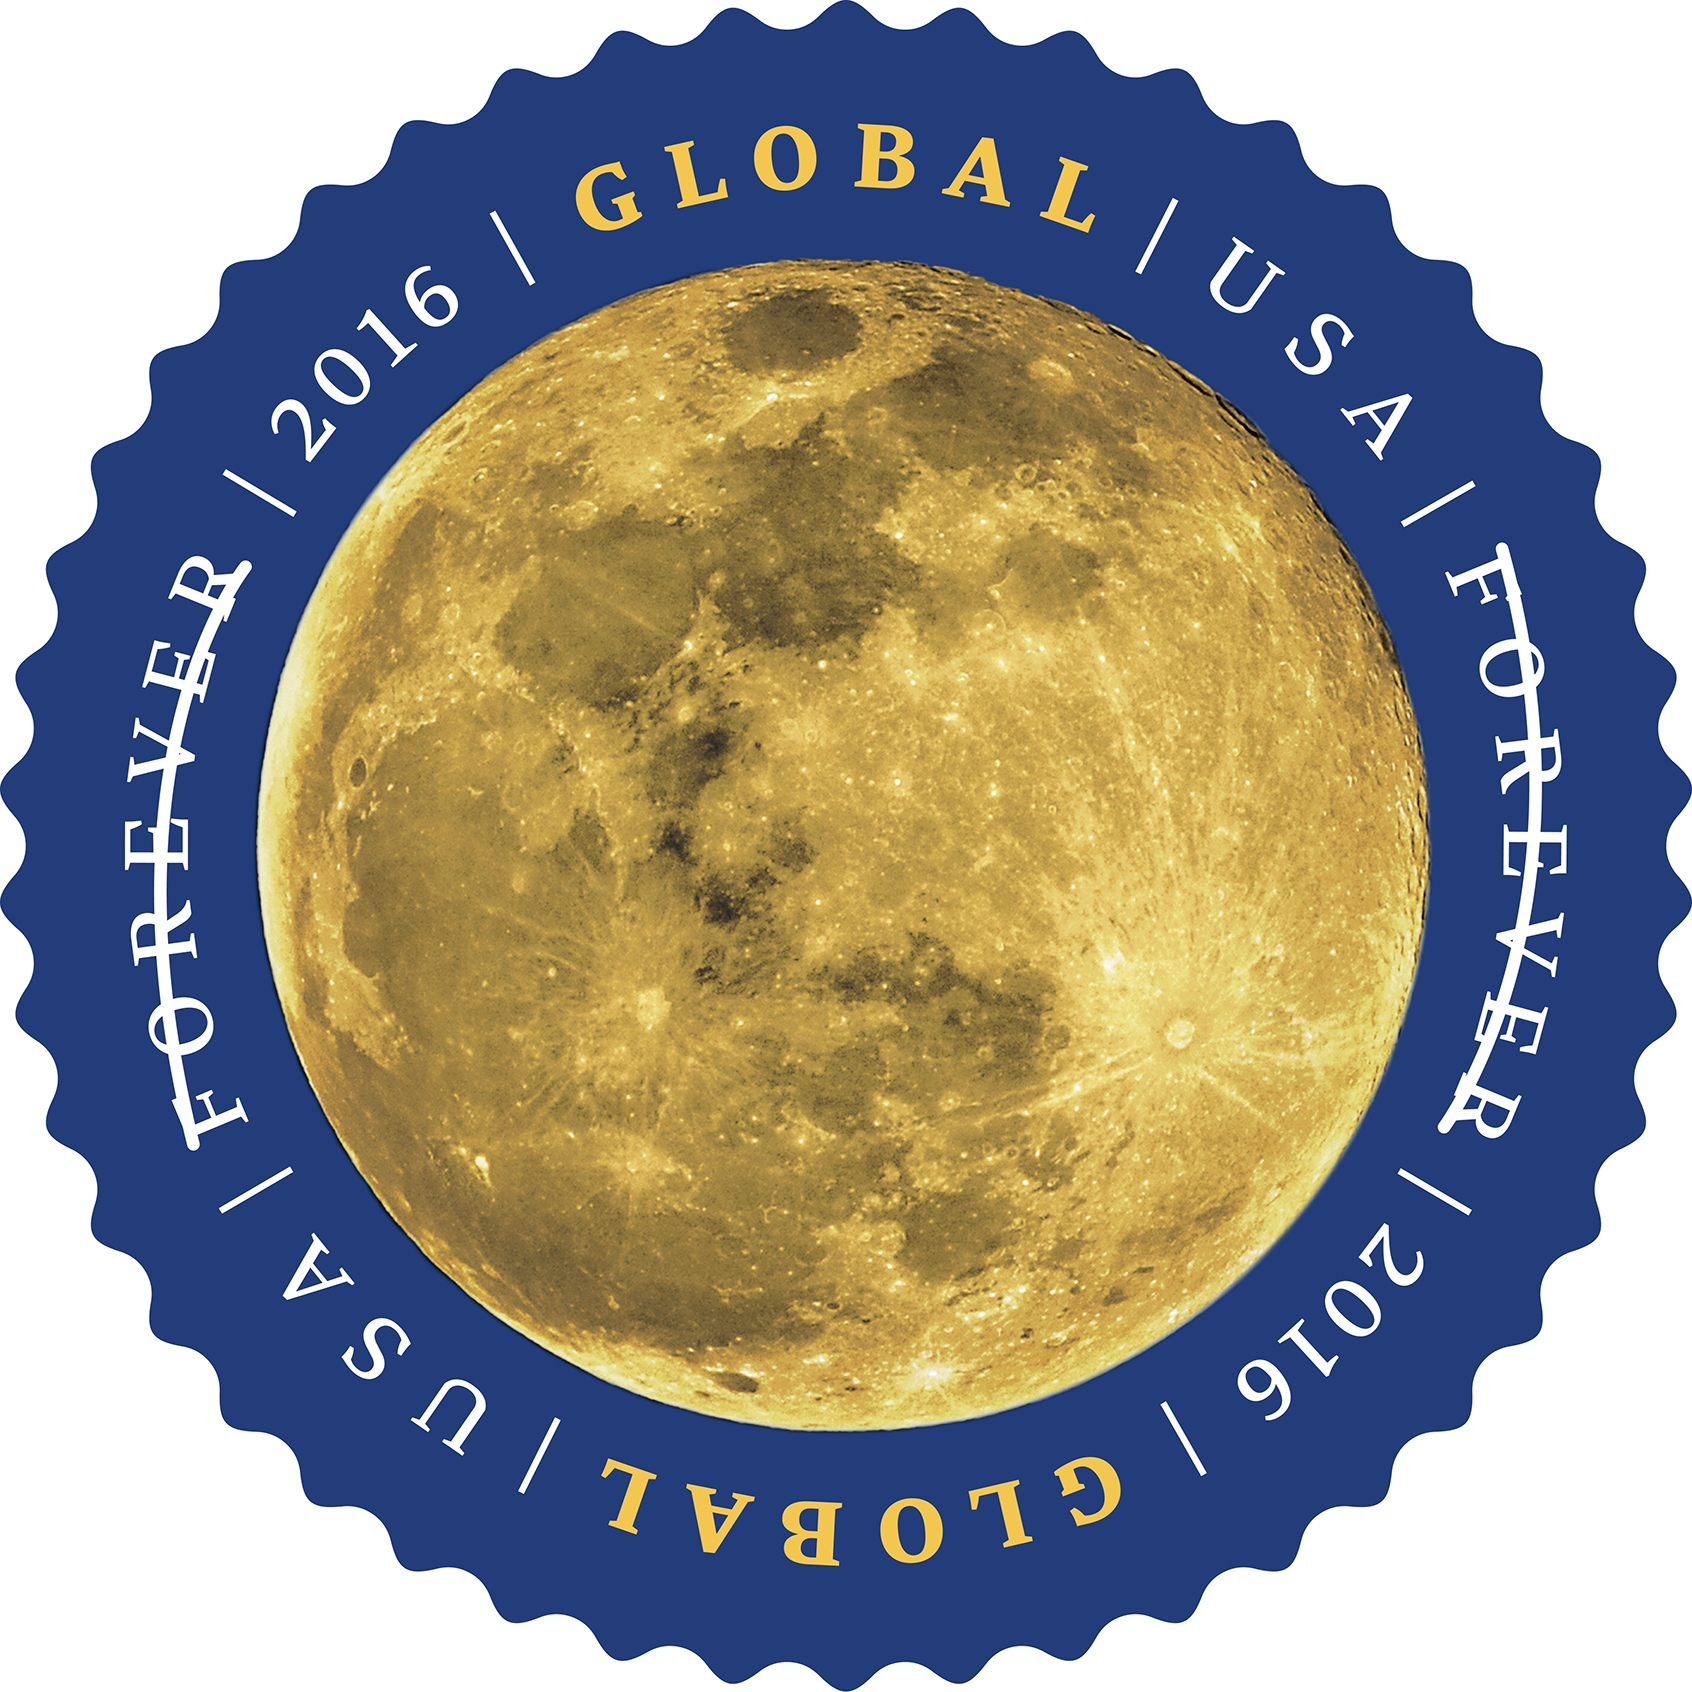 USPS issues new full moon stamp - Tucson News Now